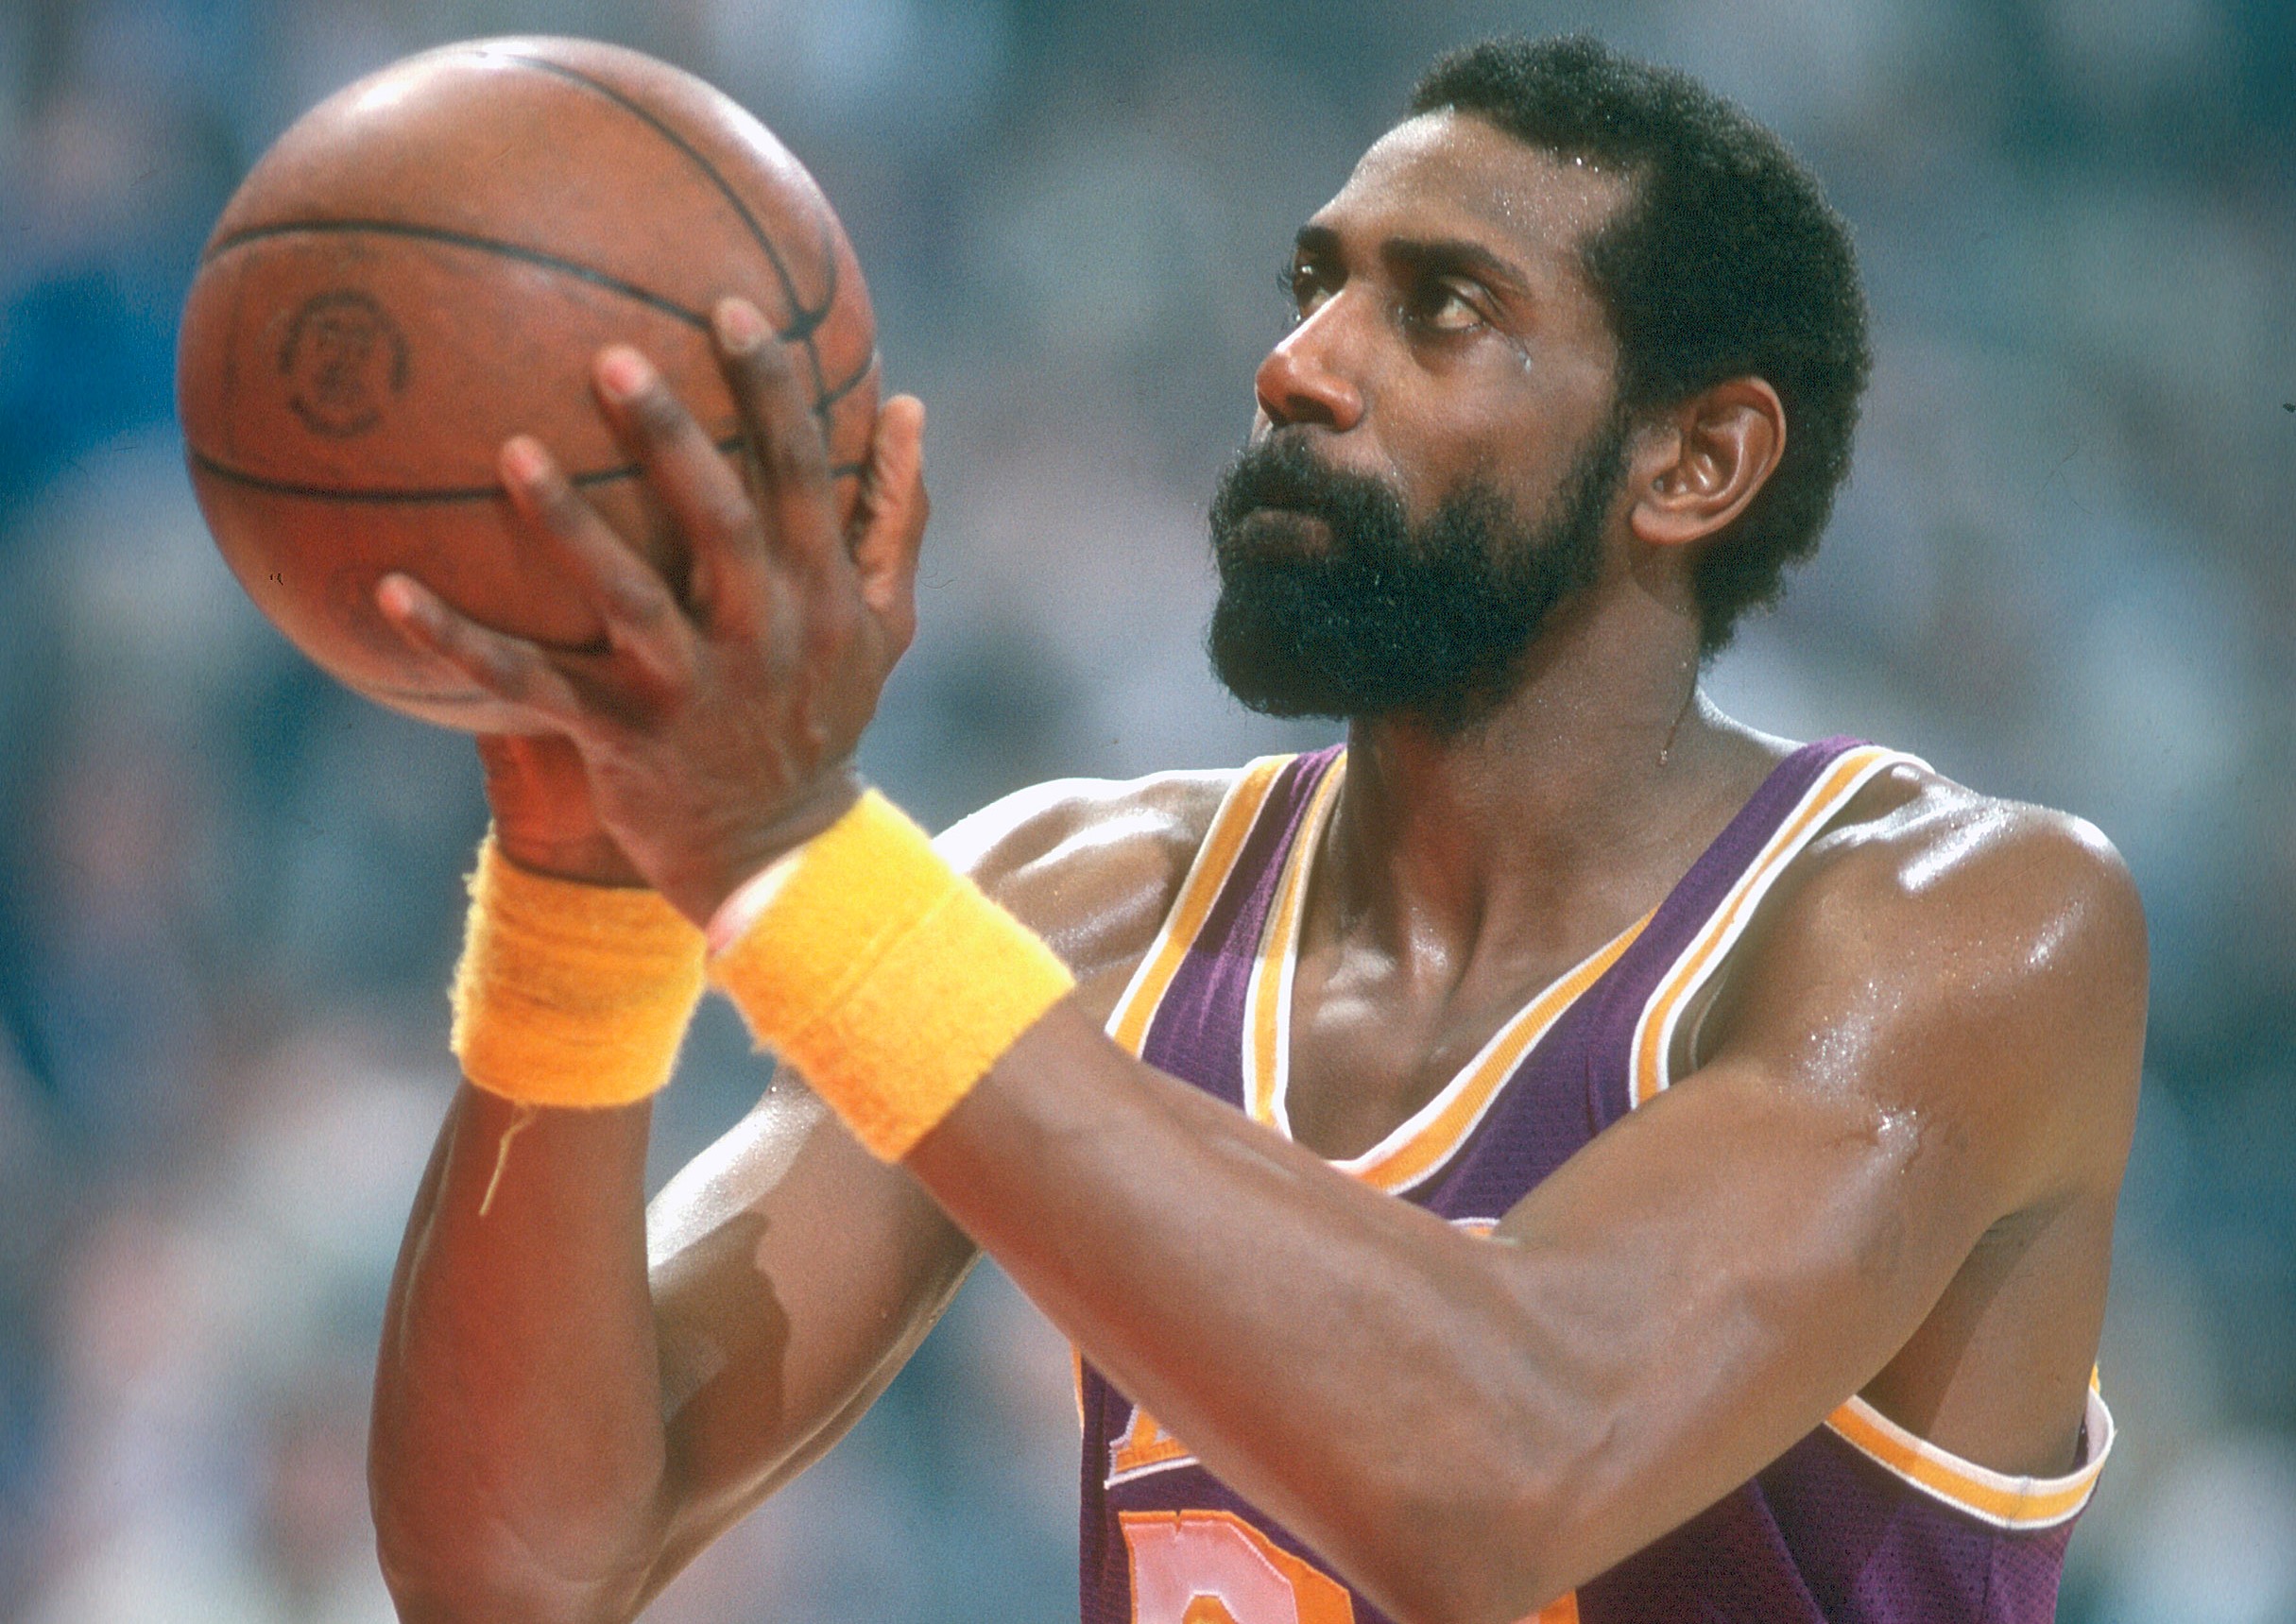 Spencer Haywood of the Los Angeles Lakers shoots a free throw.